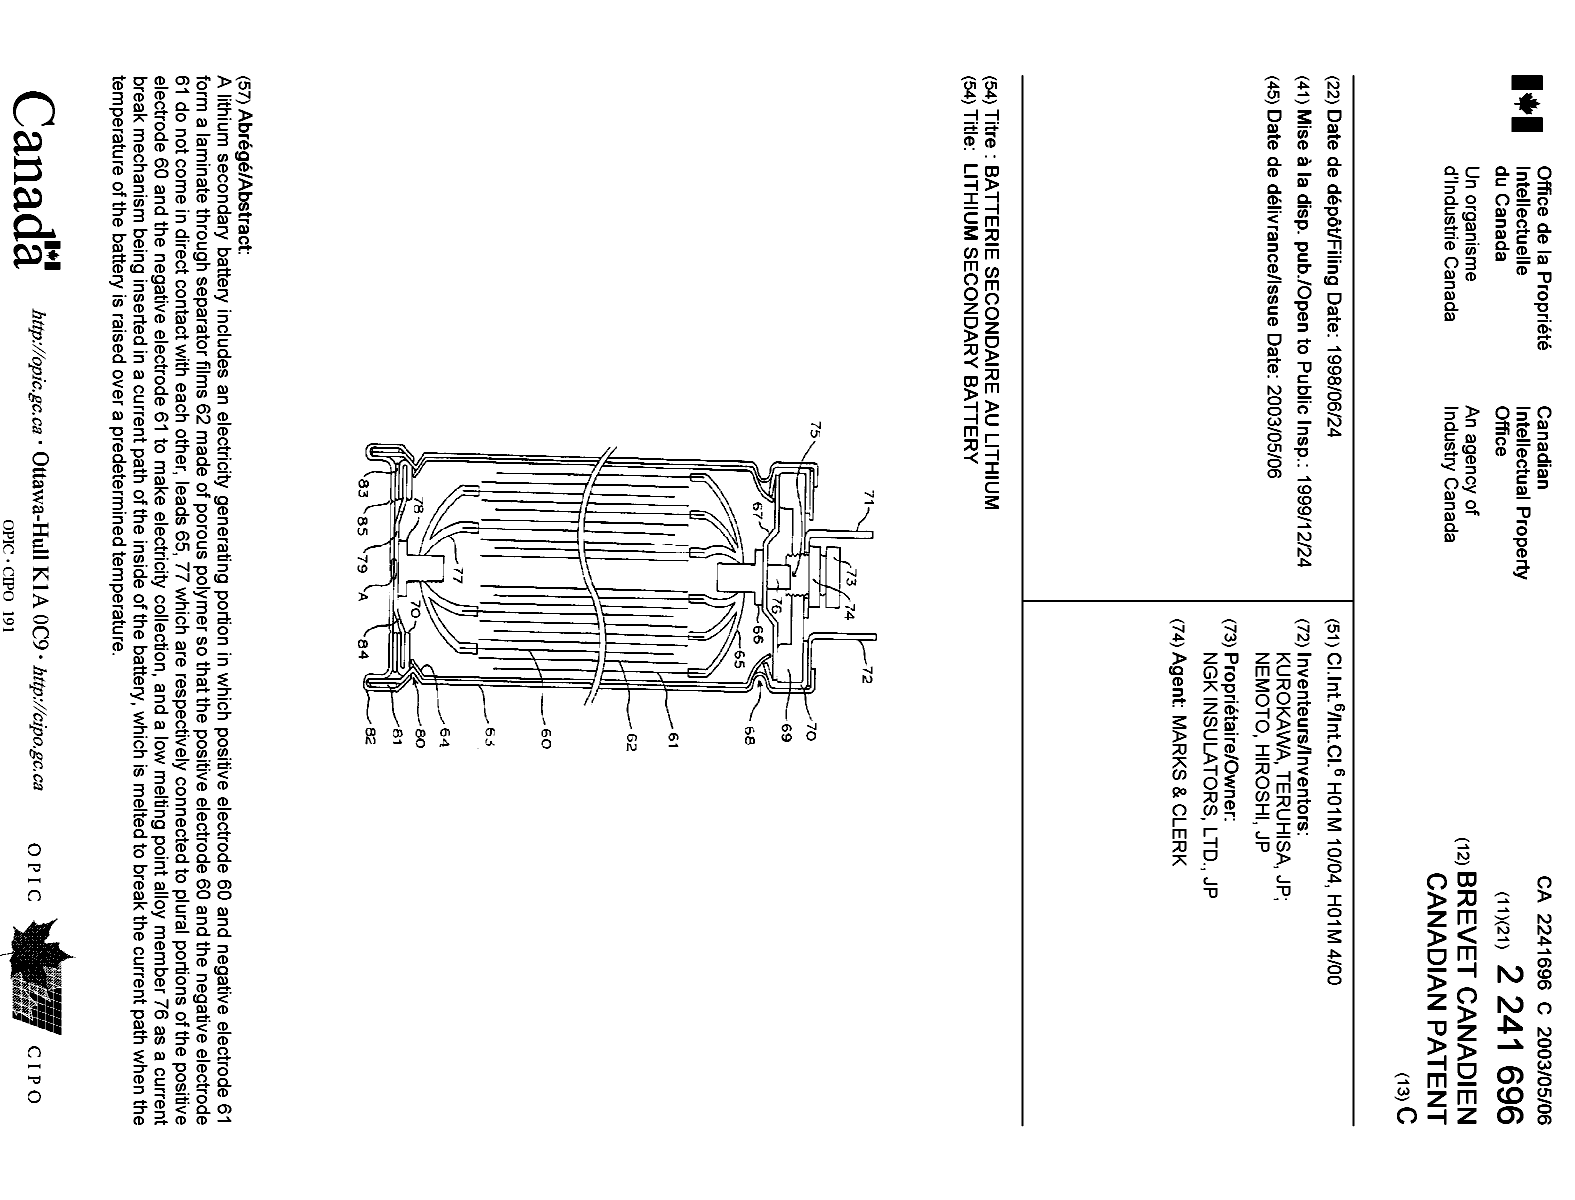 Canadian Patent Document 2241696. Cover Page 20030401. Image 1 of 1